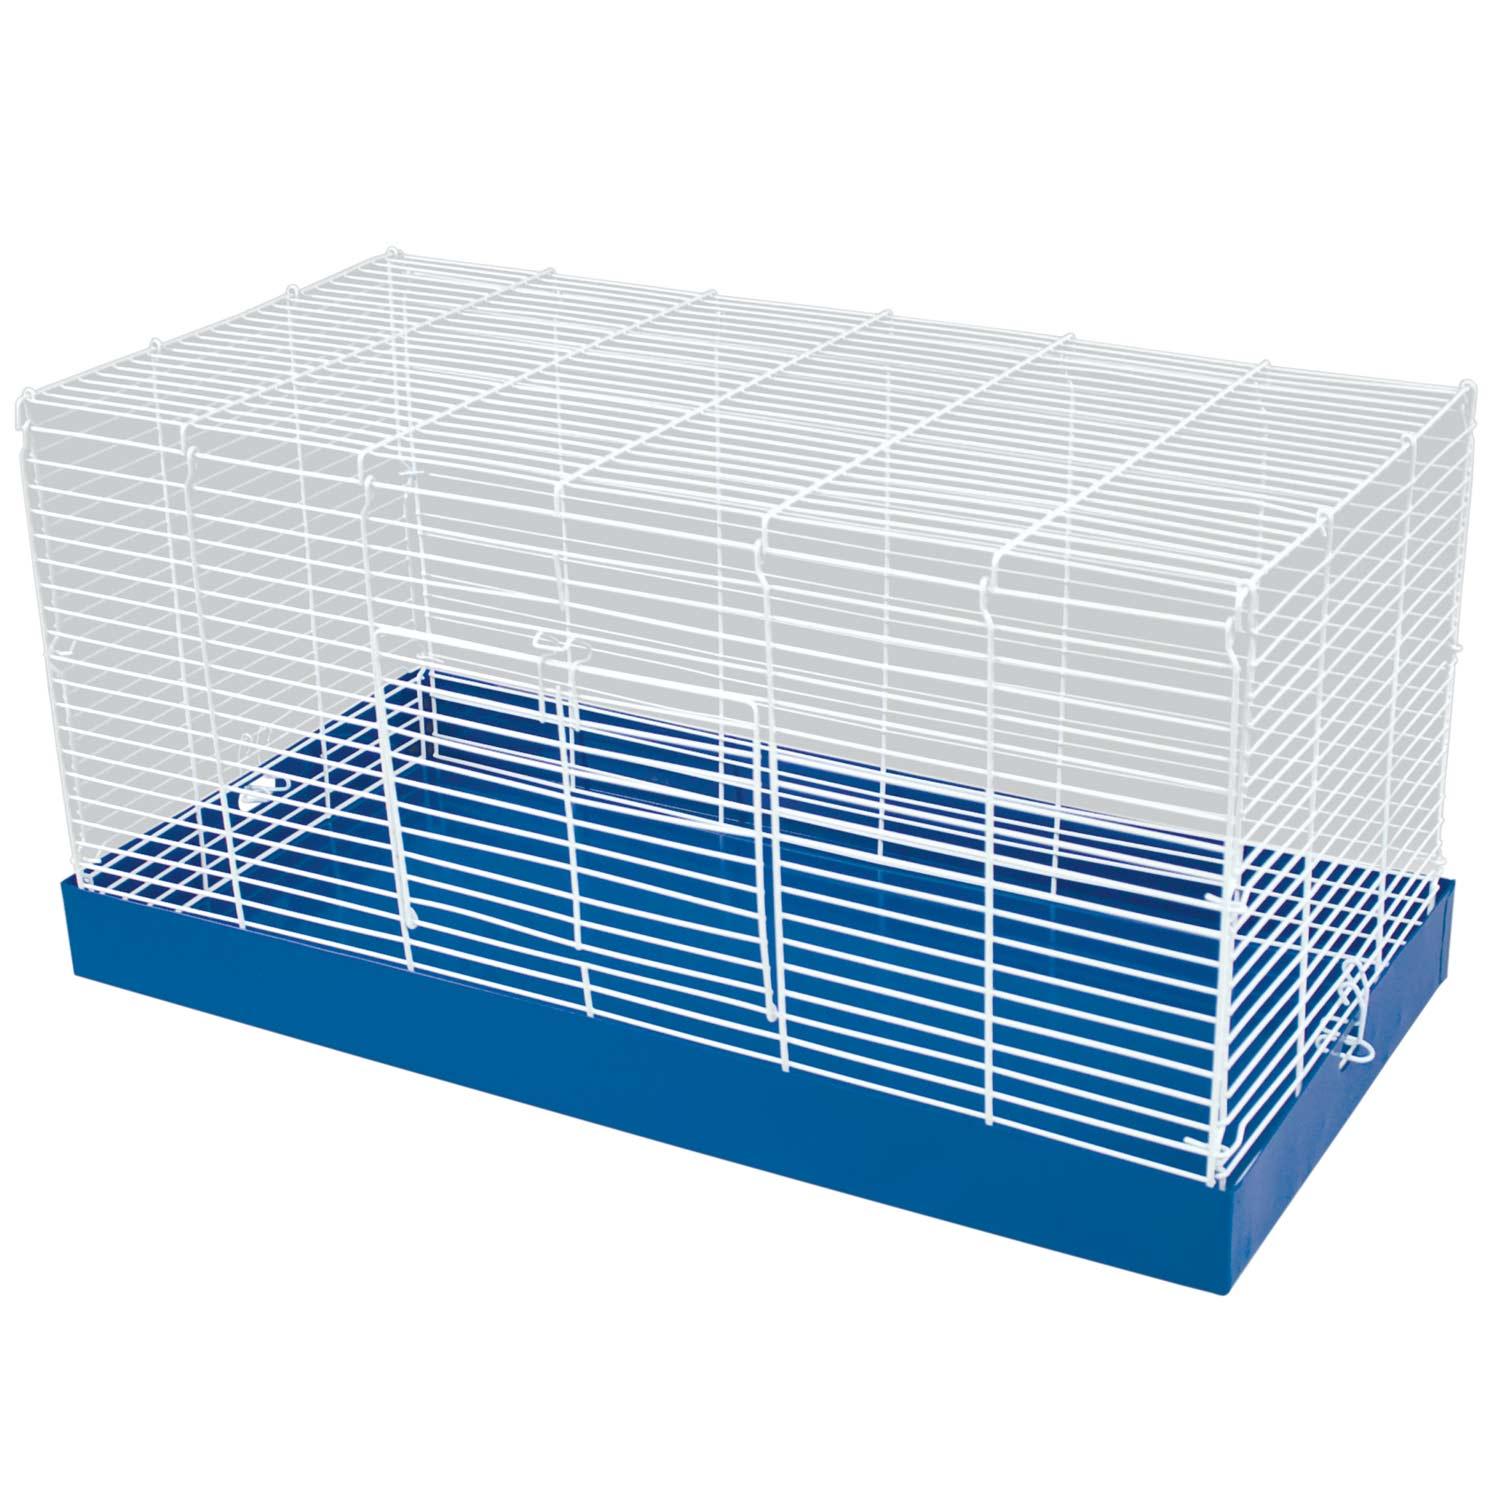 UPC 791611006610 product image for WARE Chew Proof Small Animal Critter Cage, 12.5 IN, Blue / White | upcitemdb.com